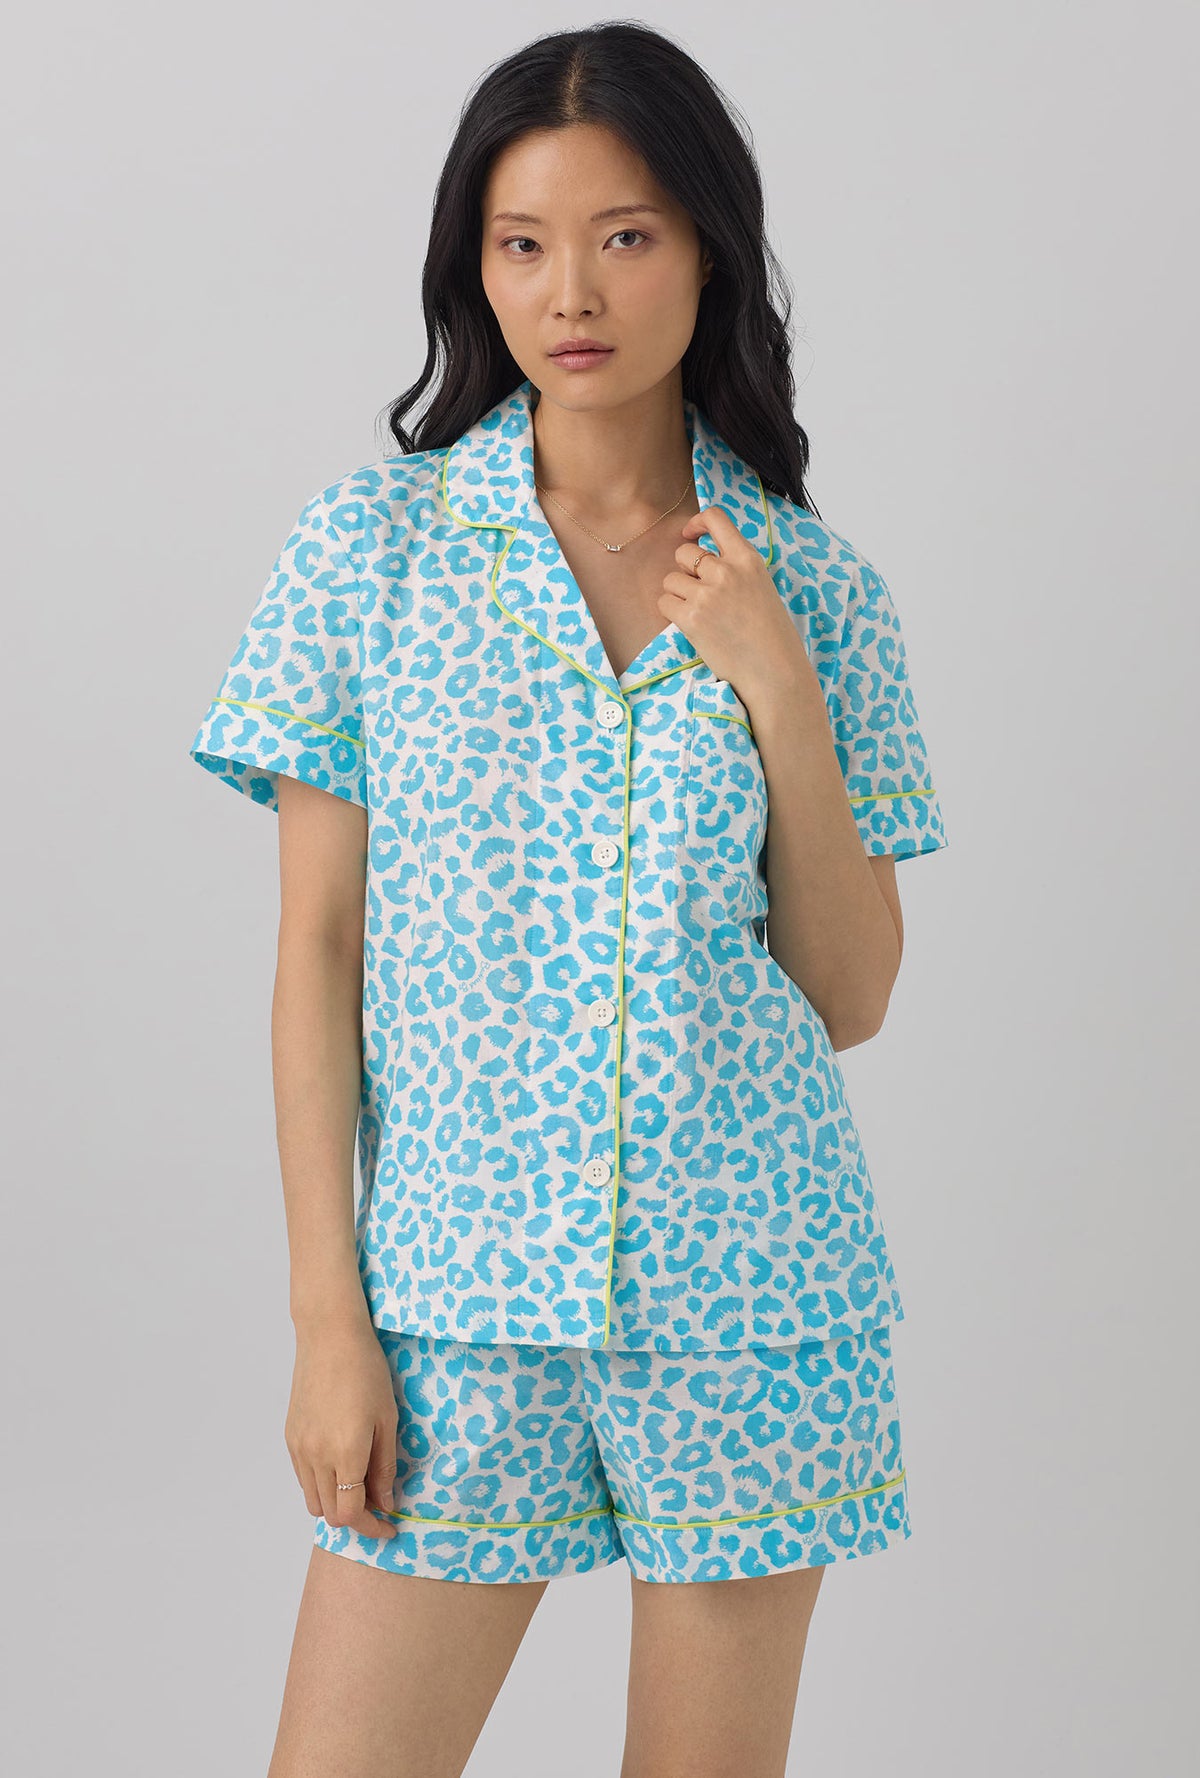 A lady wearing Short Sleeve Classic Shorty Woven Cotton Poplin PJ Set with sea bright animal